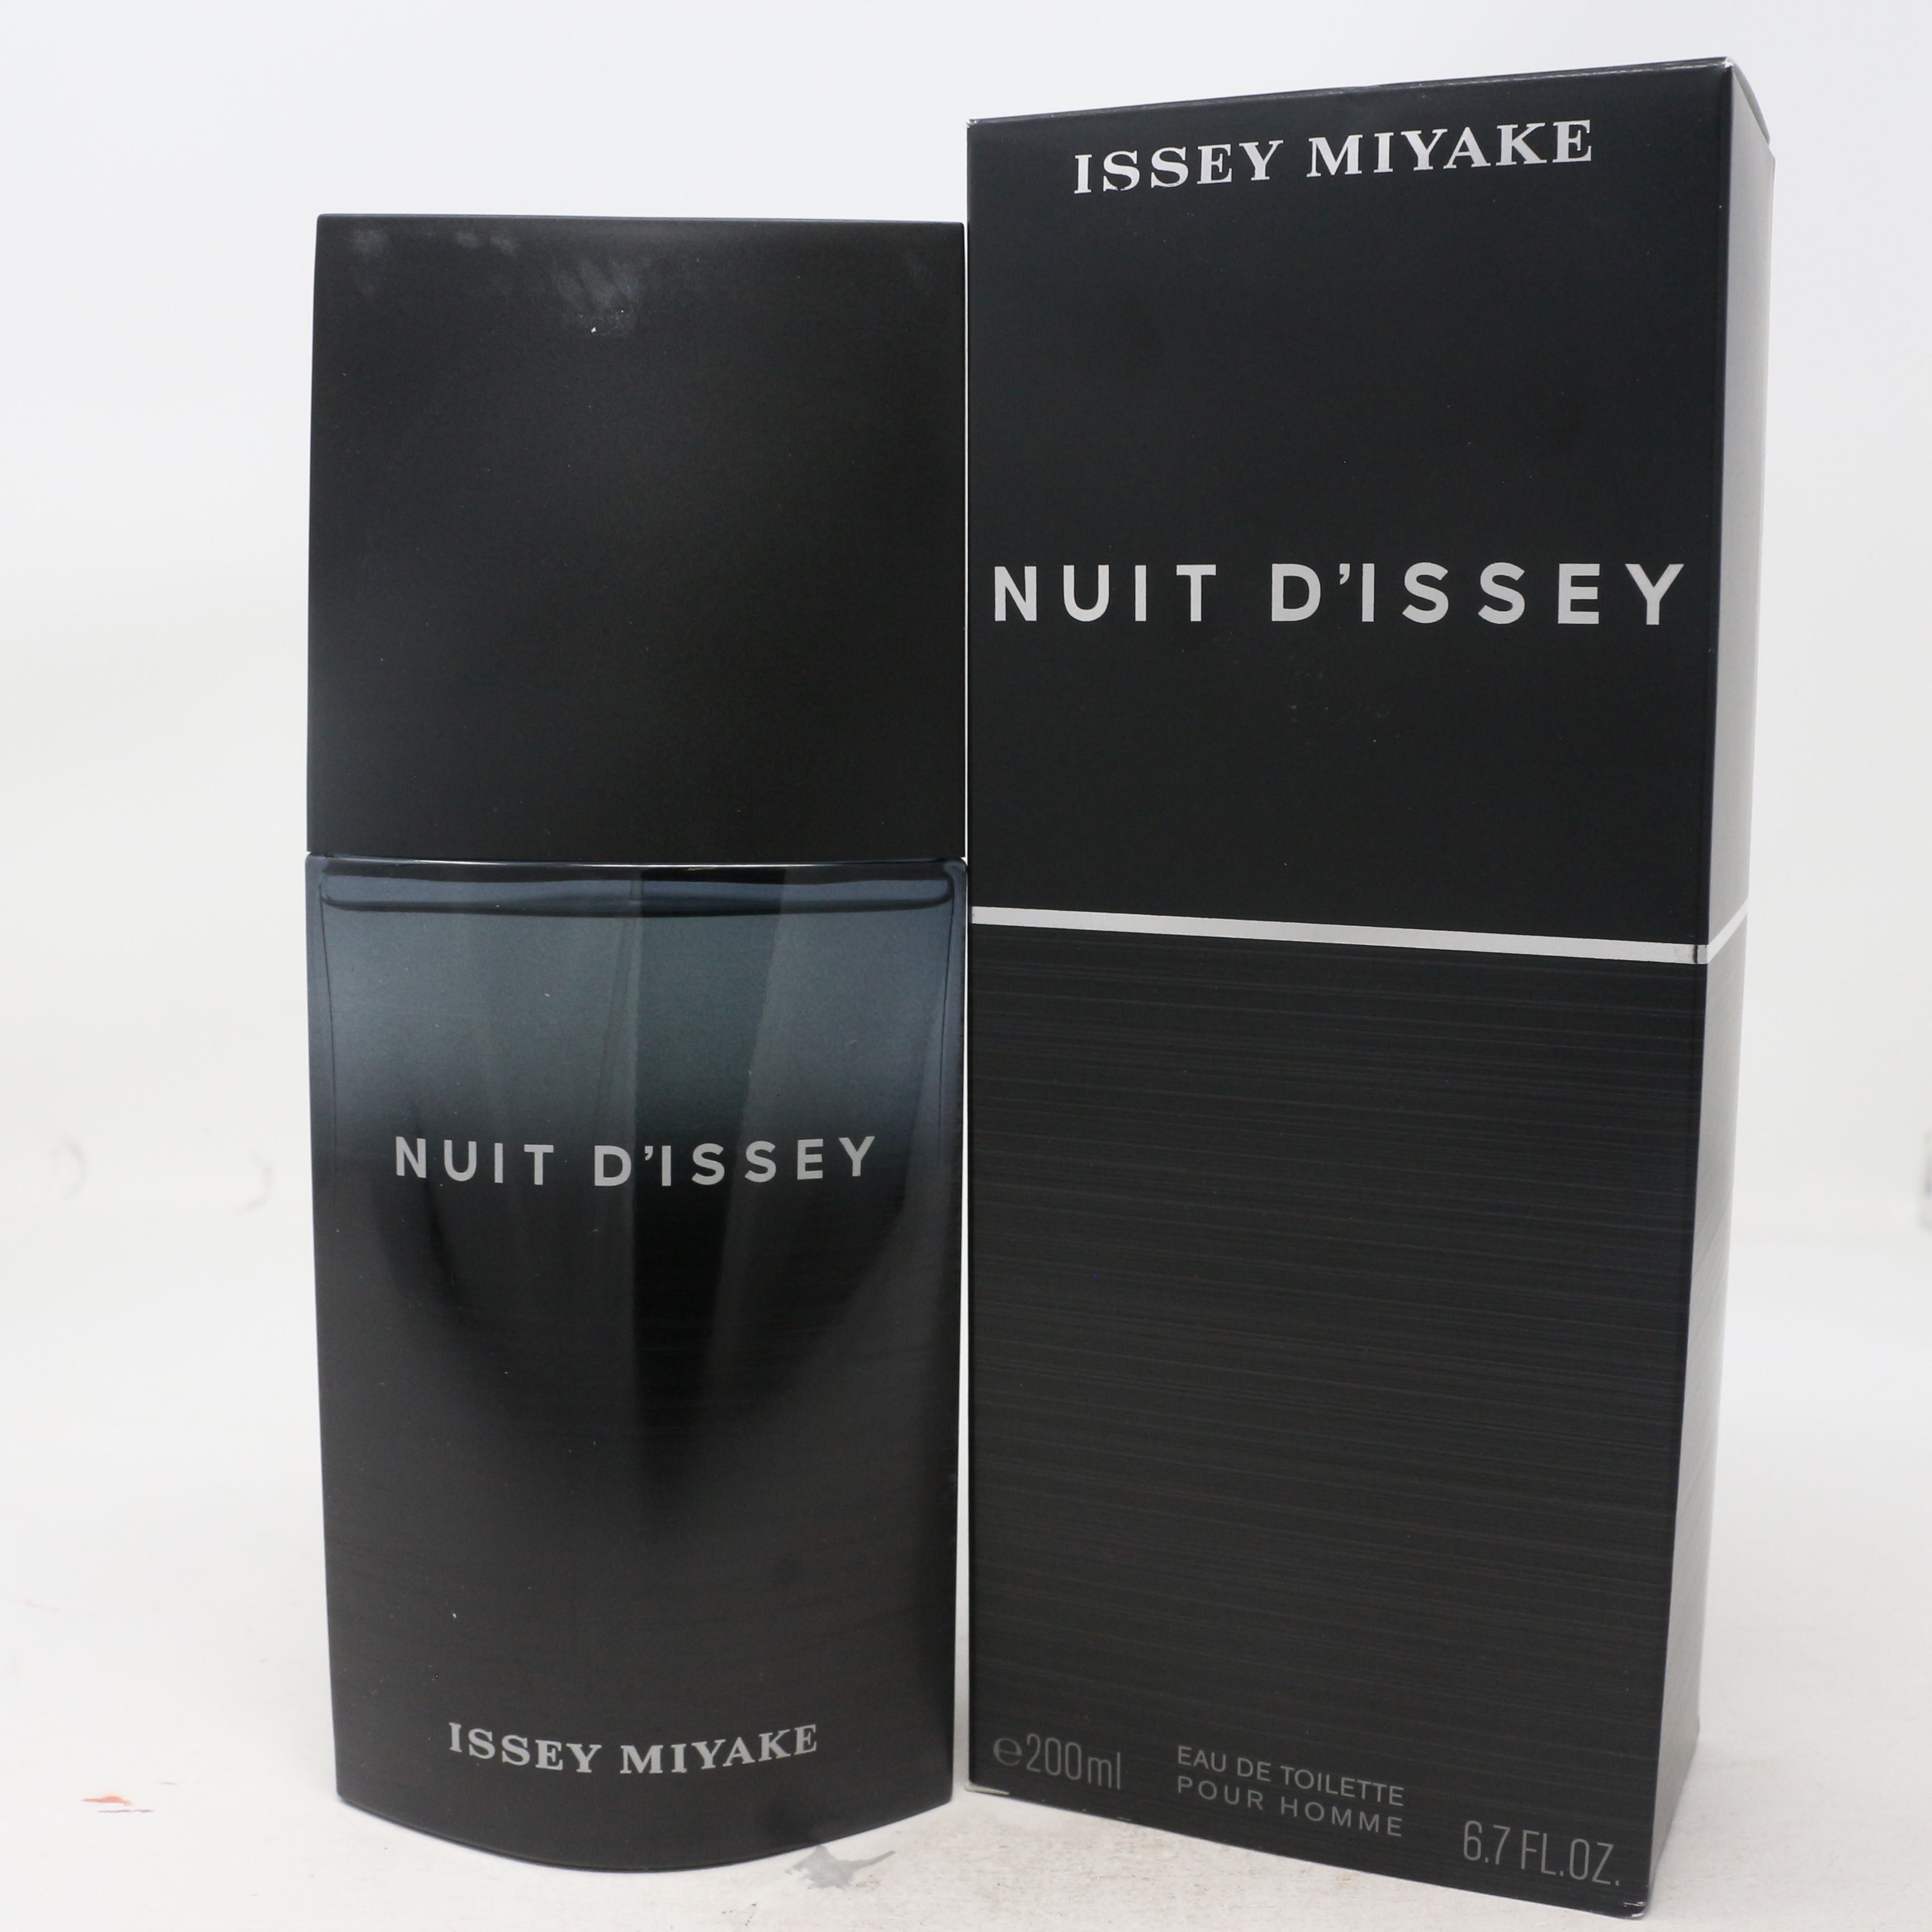 Nuit D'issey by Issey Miyake Eau De Toilette Pour Homme 6.7oz Spray New ...